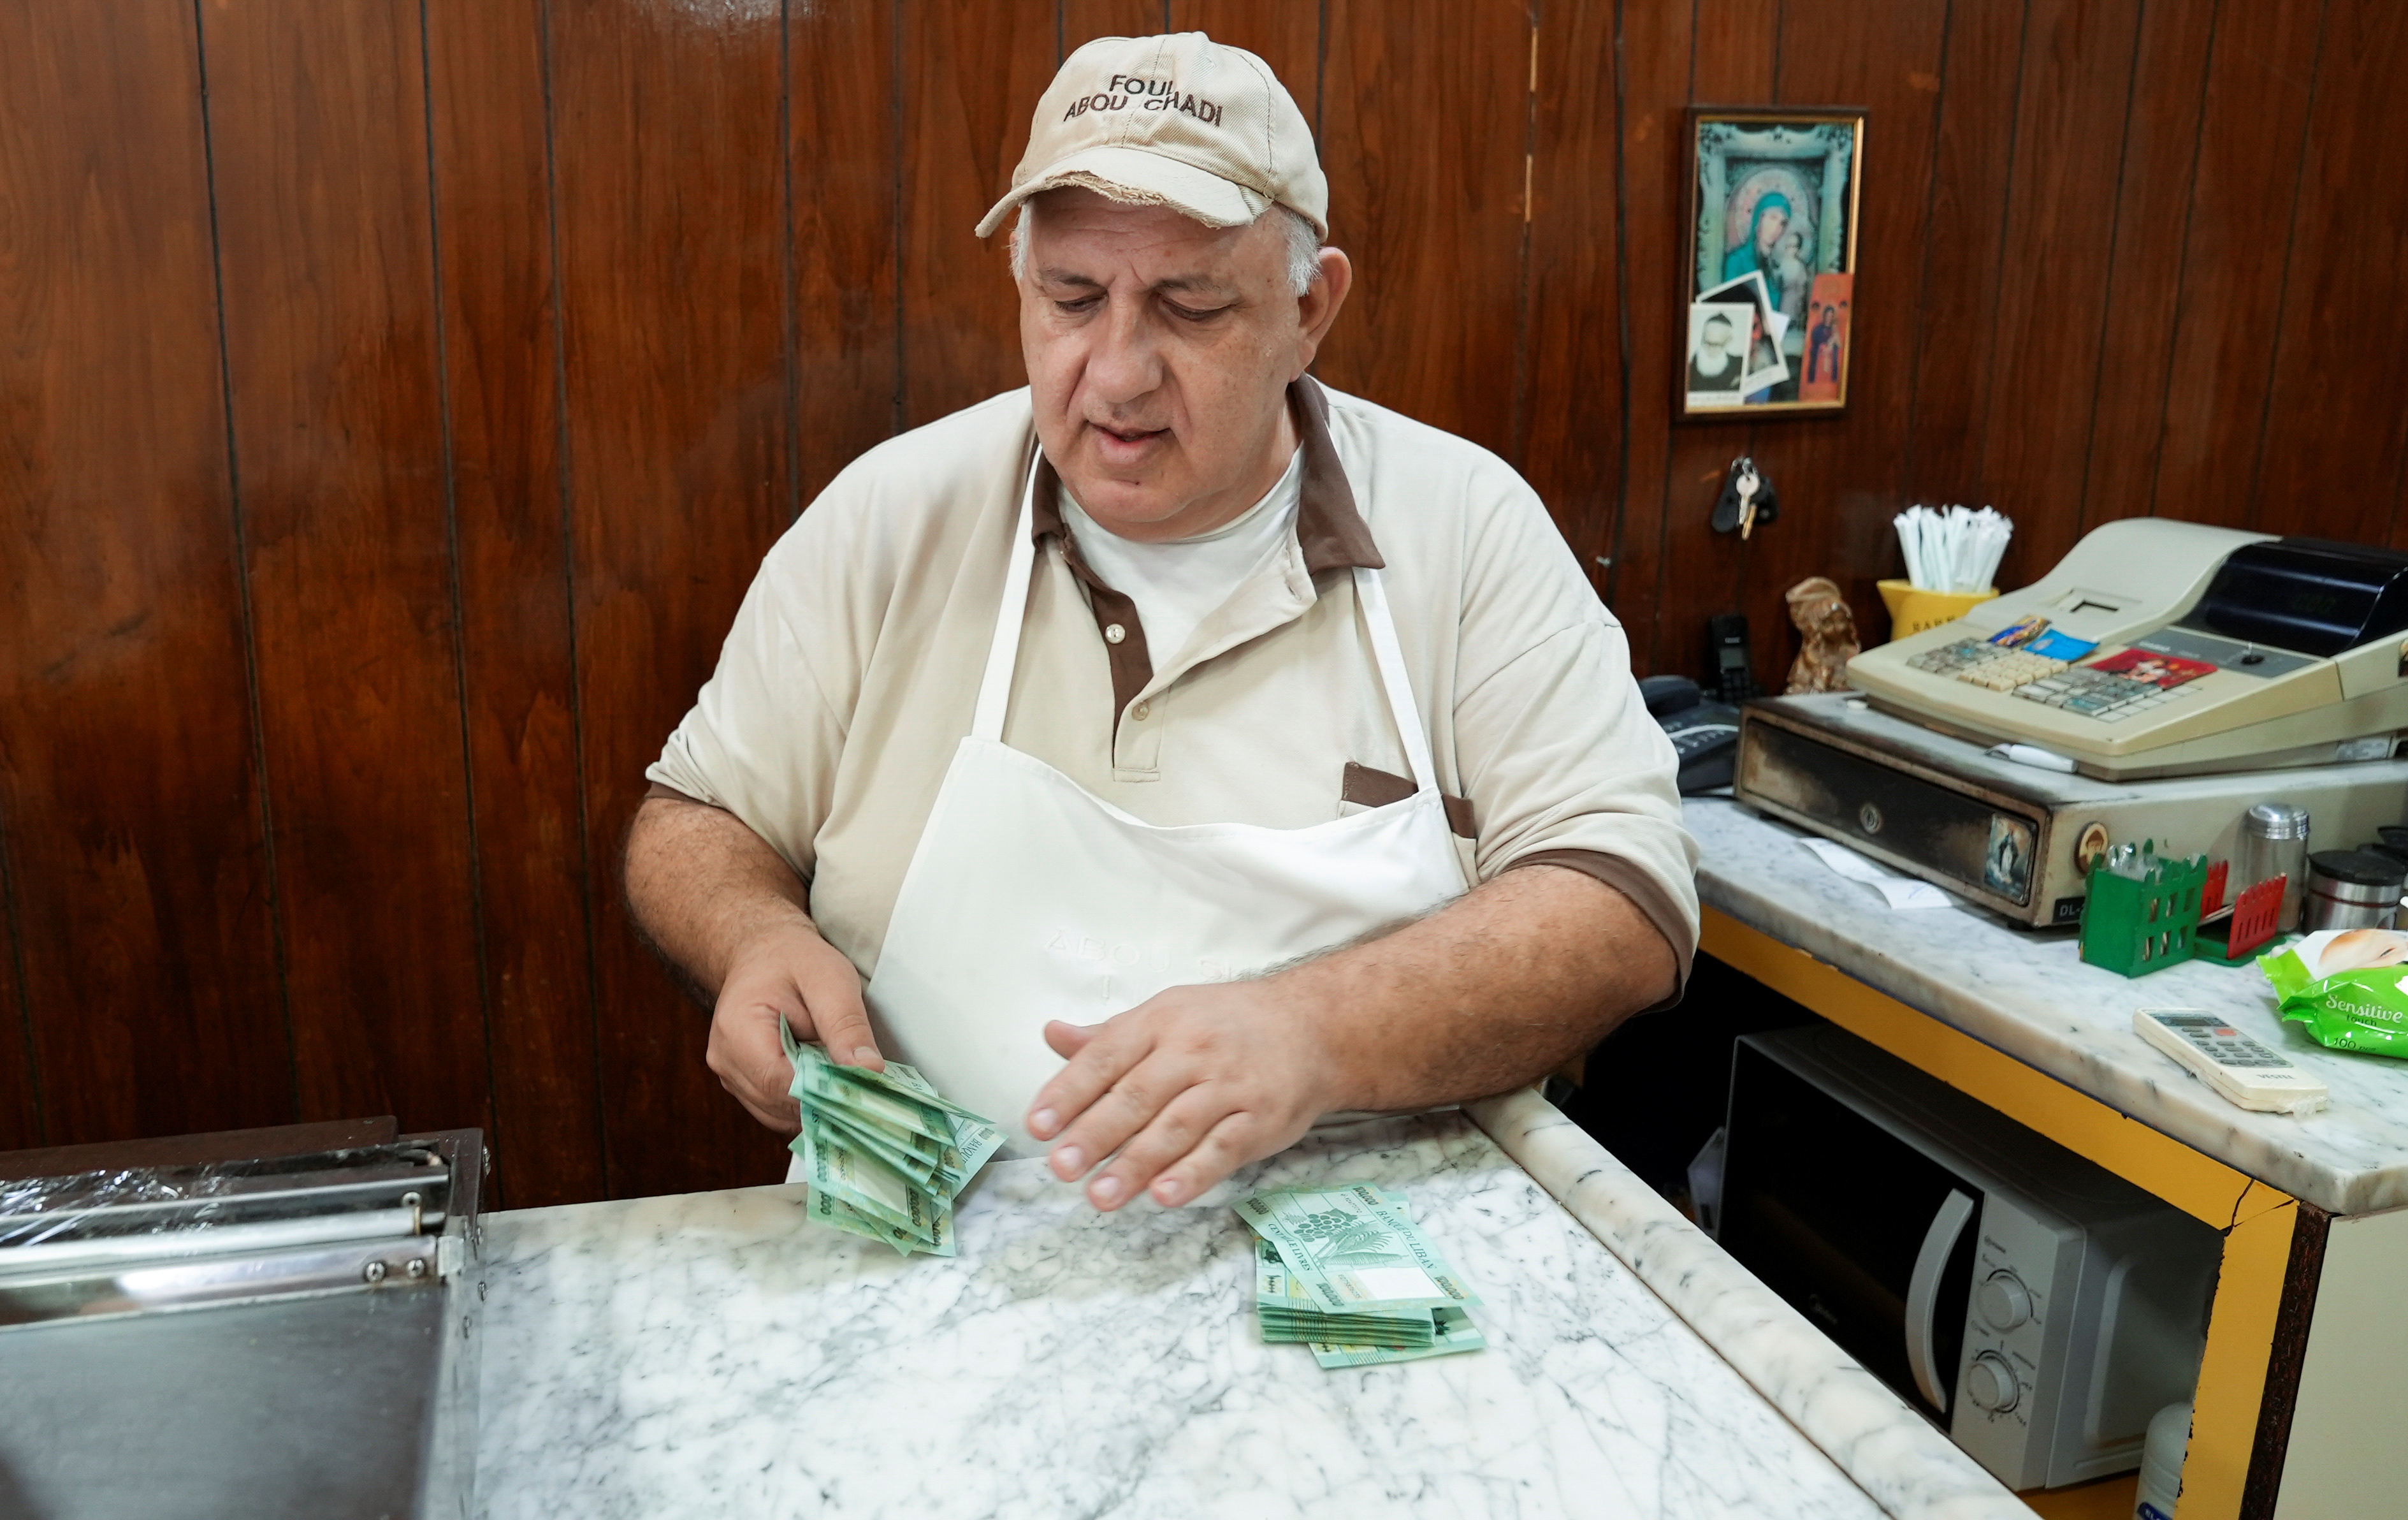 Antoine Haddad, known as Abou Chadi, a Lebanese restaurant owner, counts Lebanese pounds in Jal el-Dib, Lebanon October 26, 2021. Picture taken October 26, 2021. REUTERS/Issam Abdallah